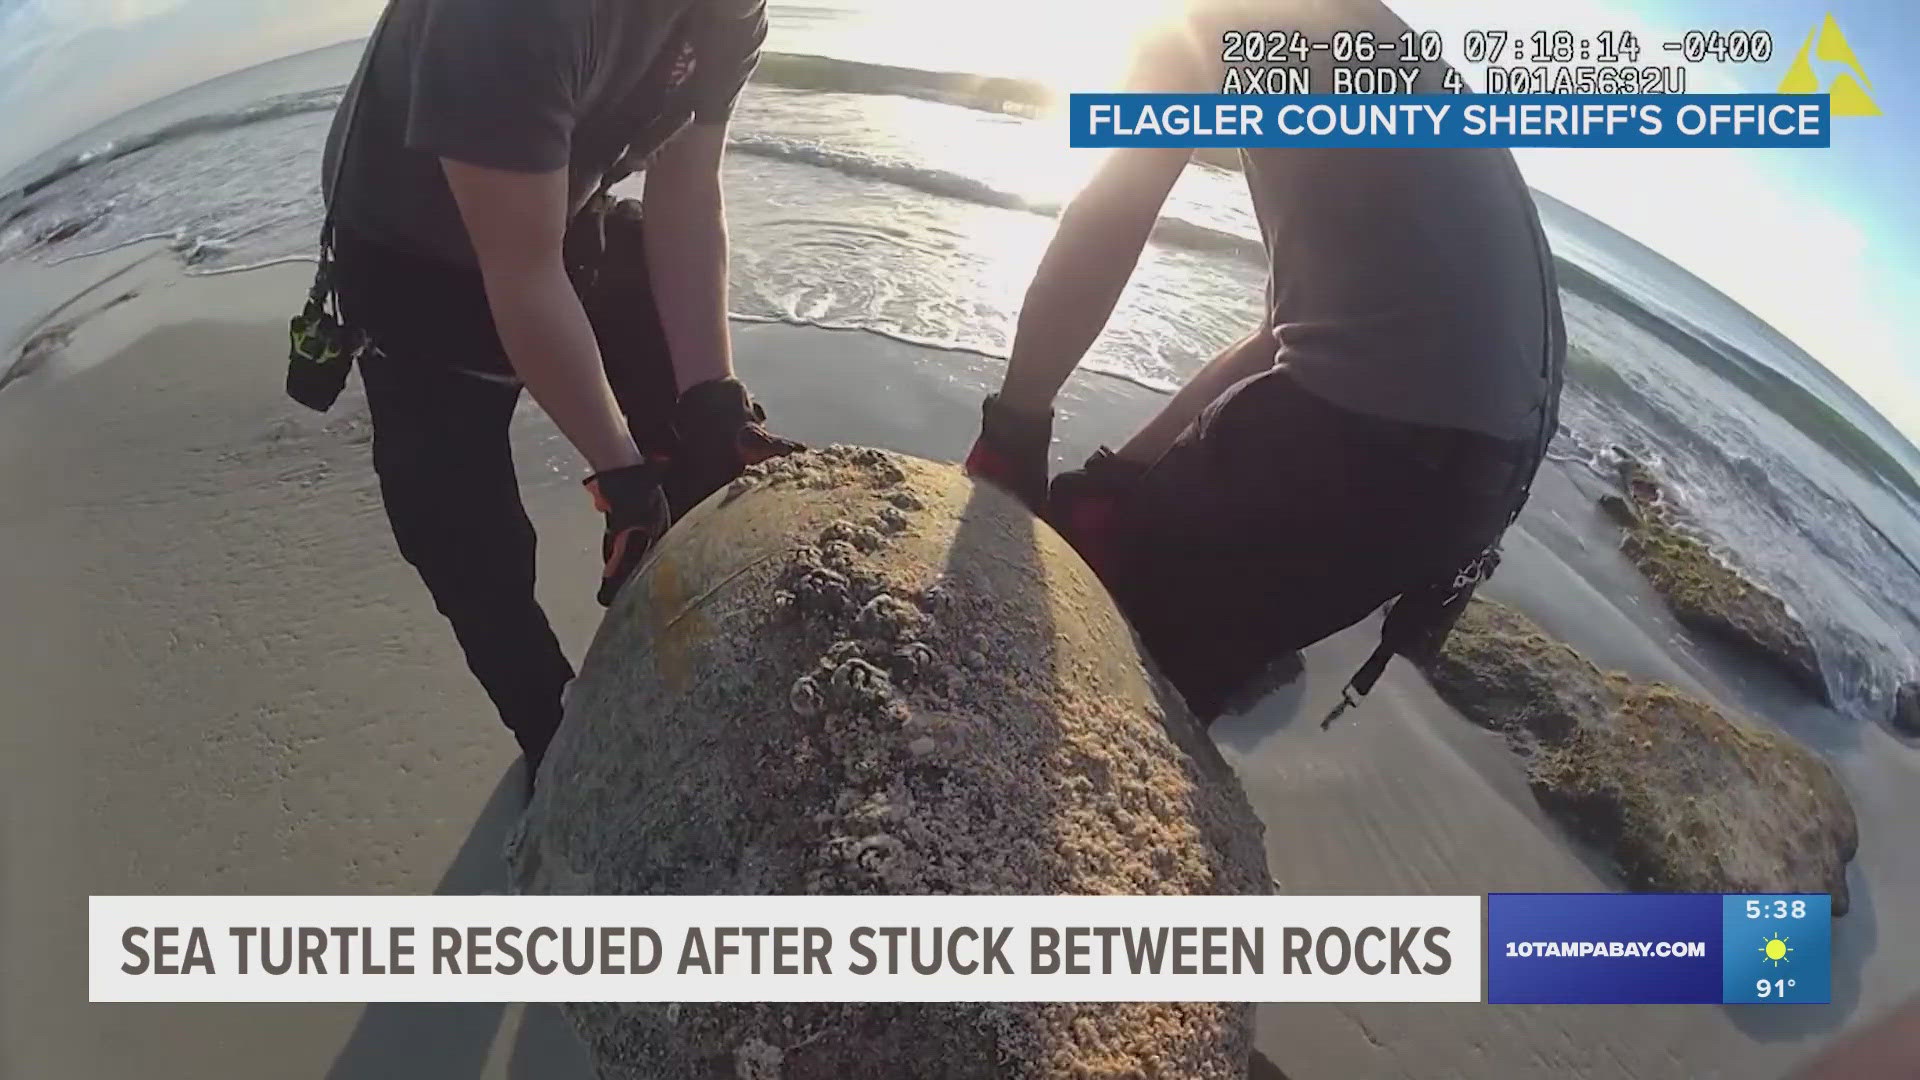 The "very large" sea turtle was found in the coquina rocks along the sand dunes, deputies said on Facebook.